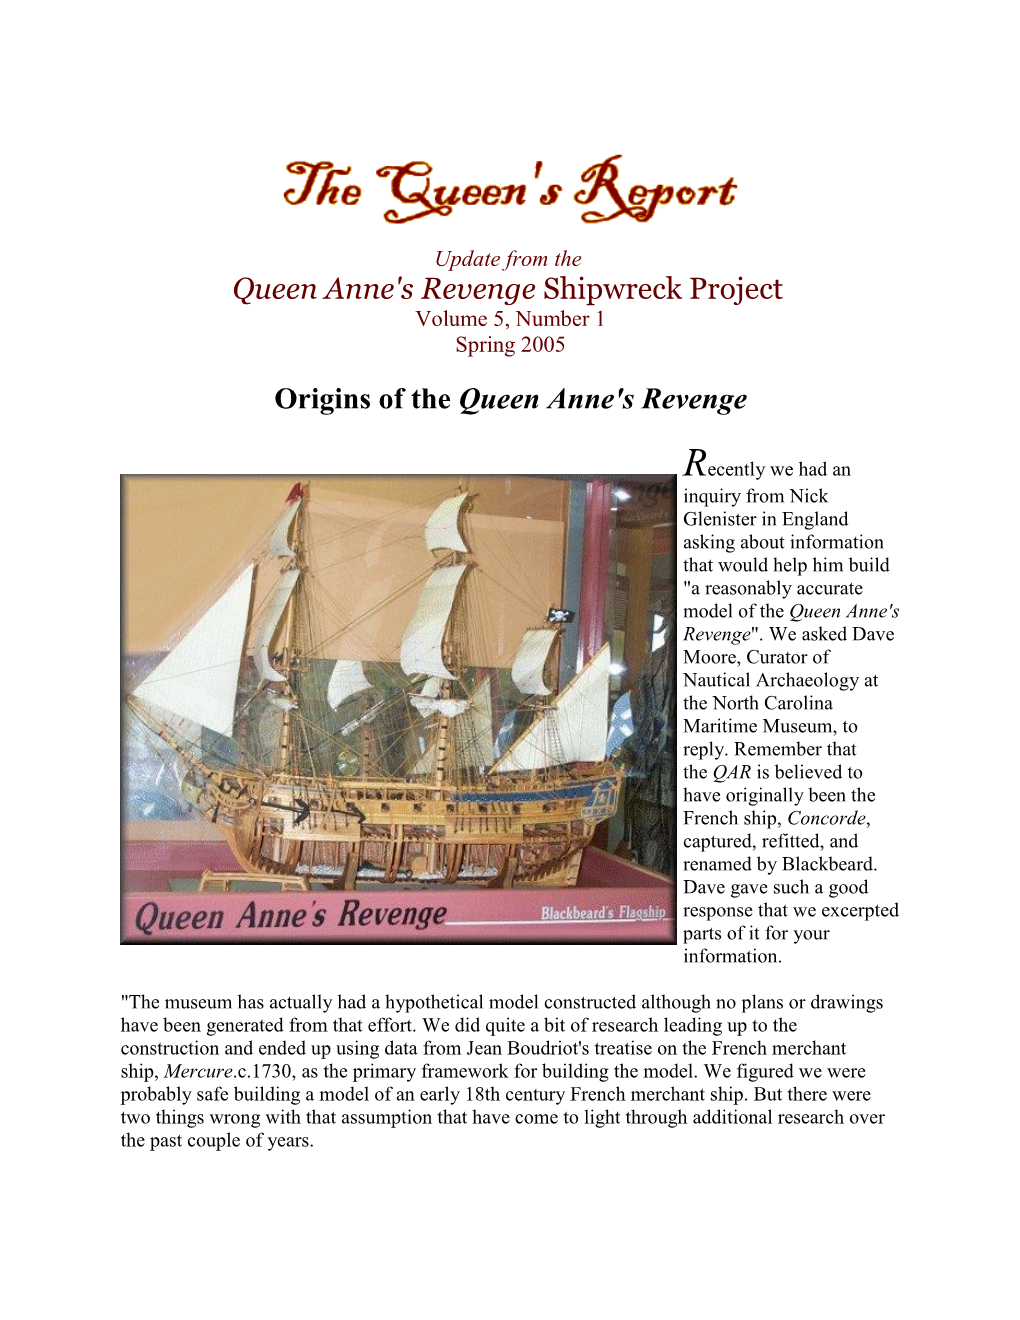 Queen Anne's Revenge Shipwreck Project Volume 5, Number 1 Spring 2005